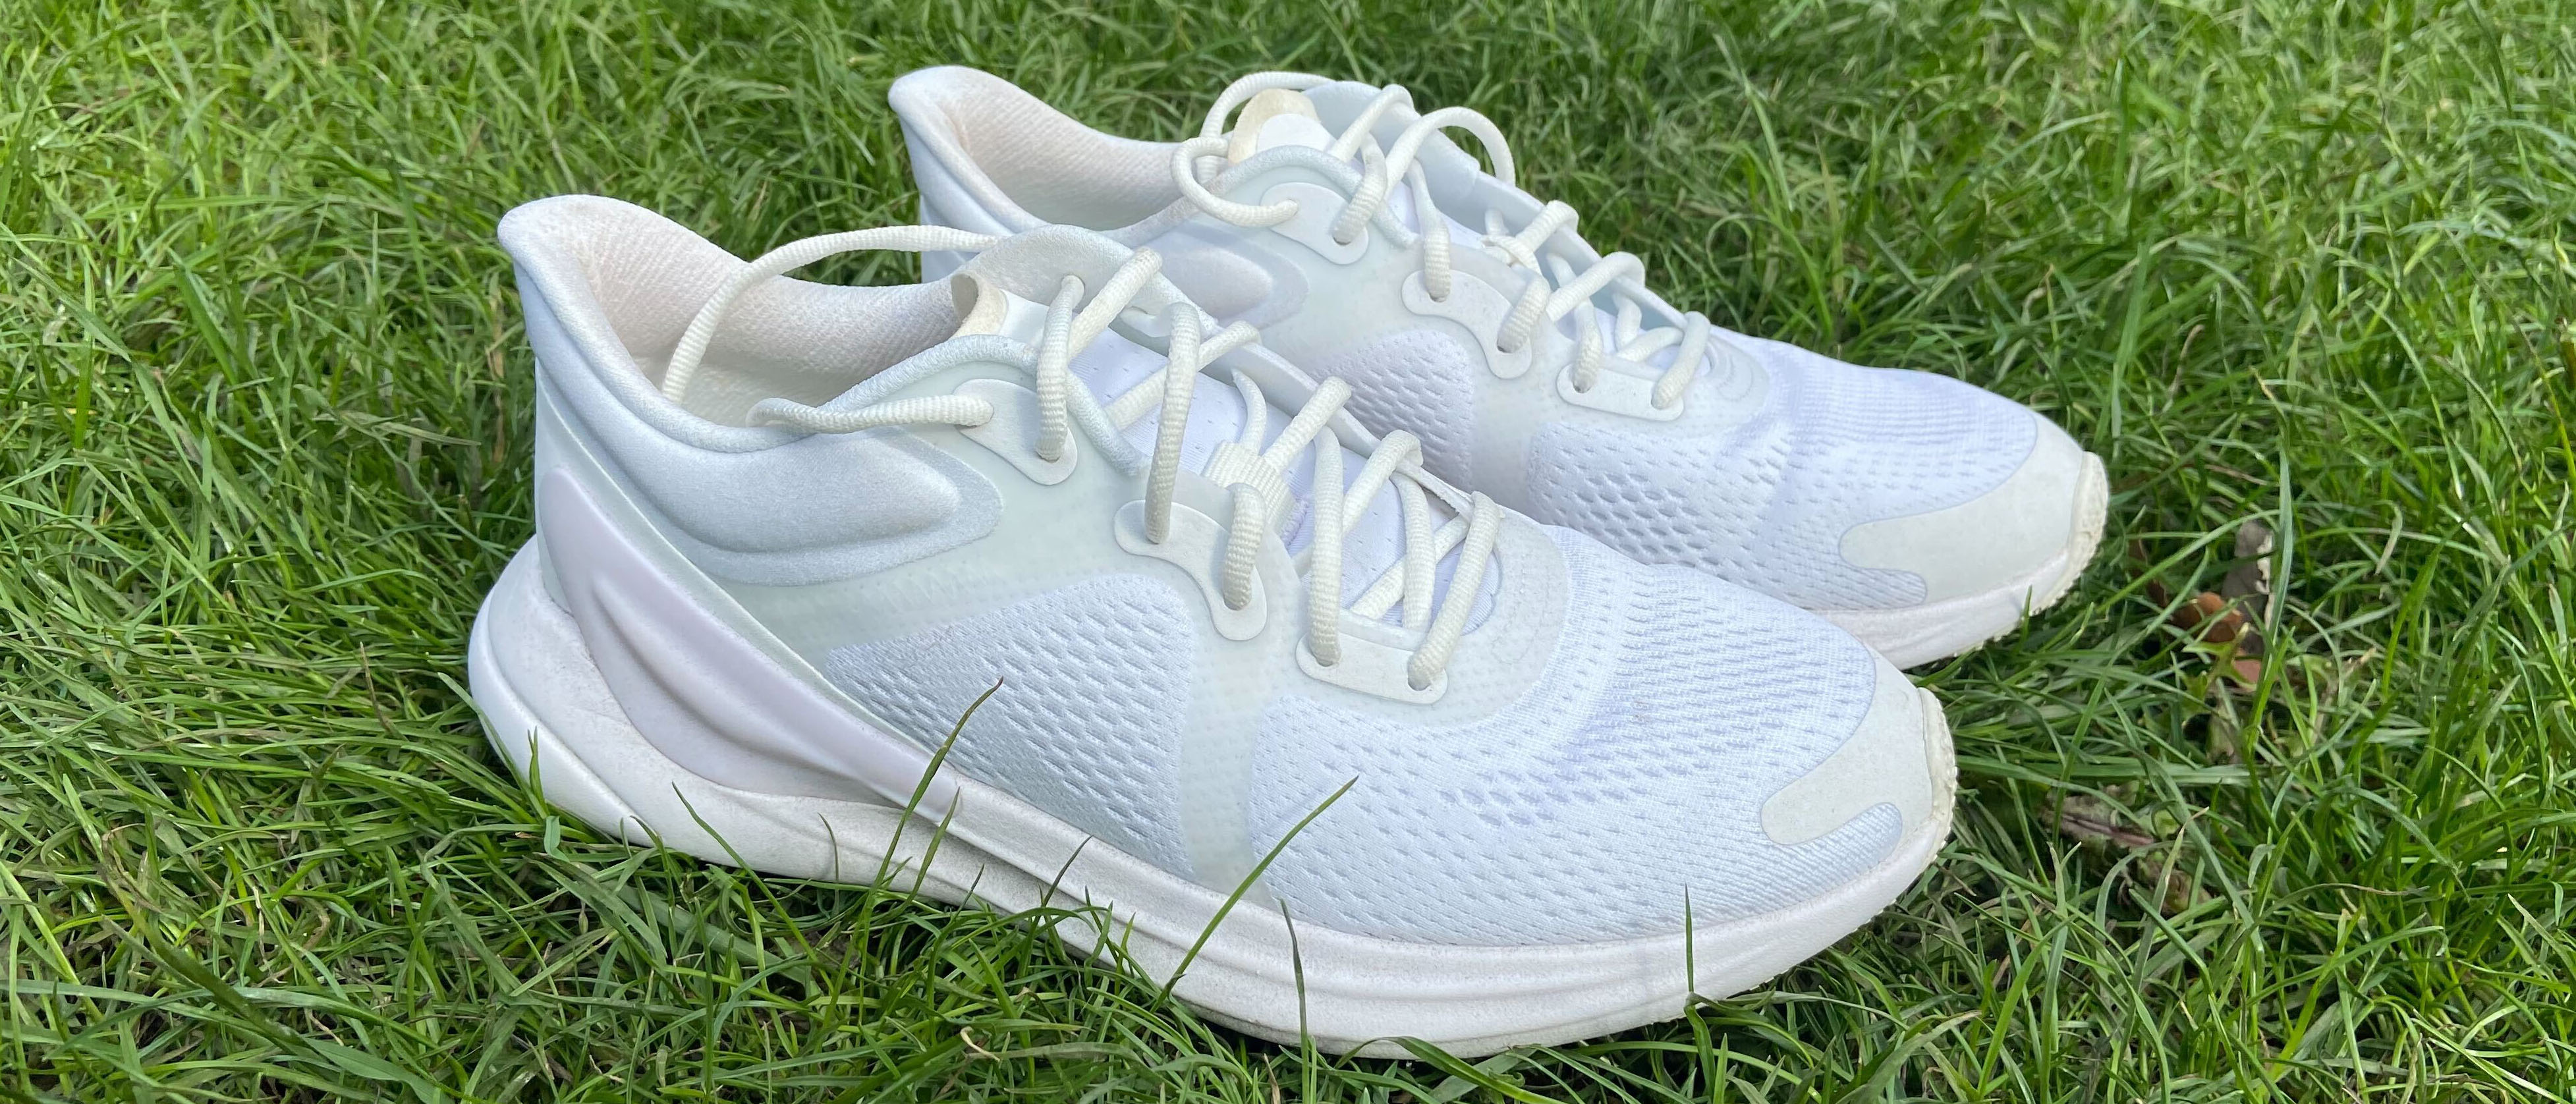 Lululemon Blissfeel Review: The Athleisure Brand's First Running Shoe Is  Here, And I Didn't Hate It